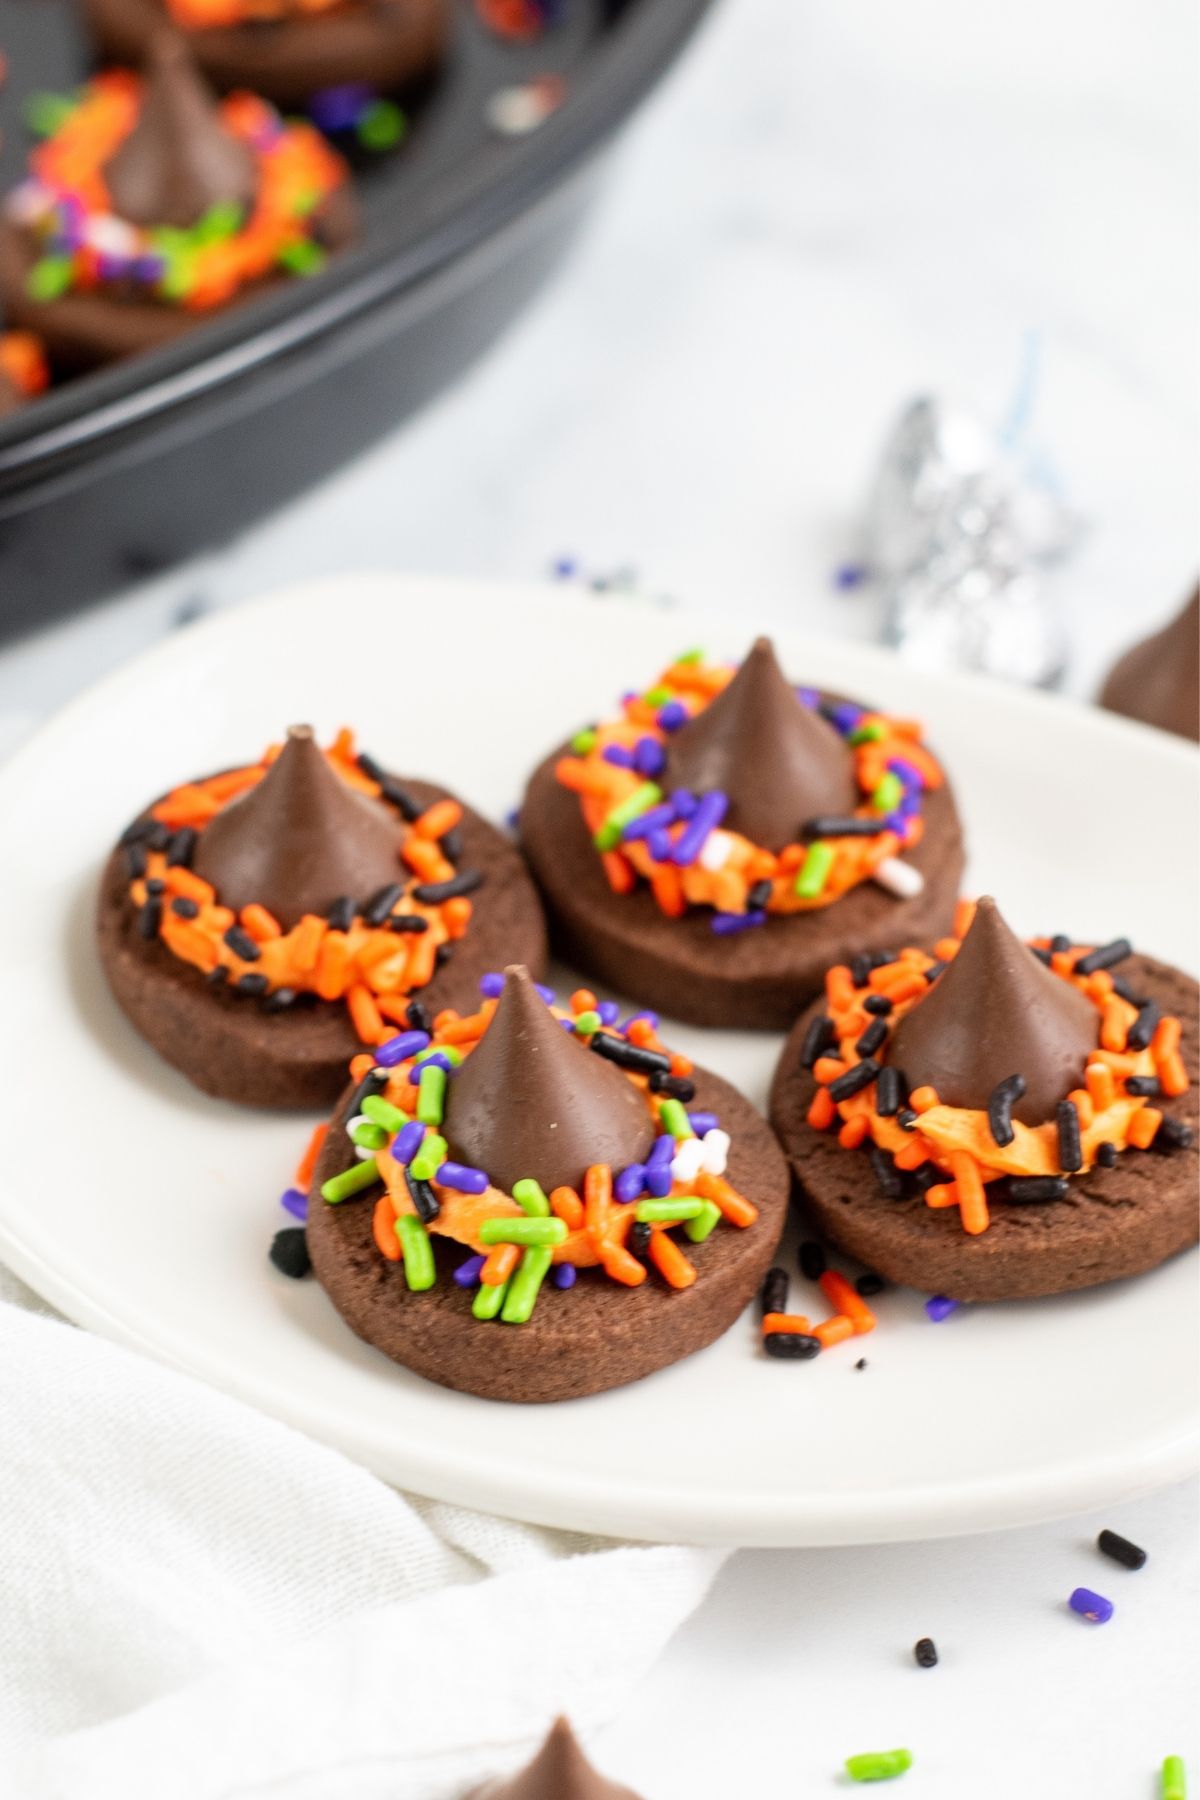 four chocolate cookies with geen, orange, and purple sprinkles with hershey's kiss on top